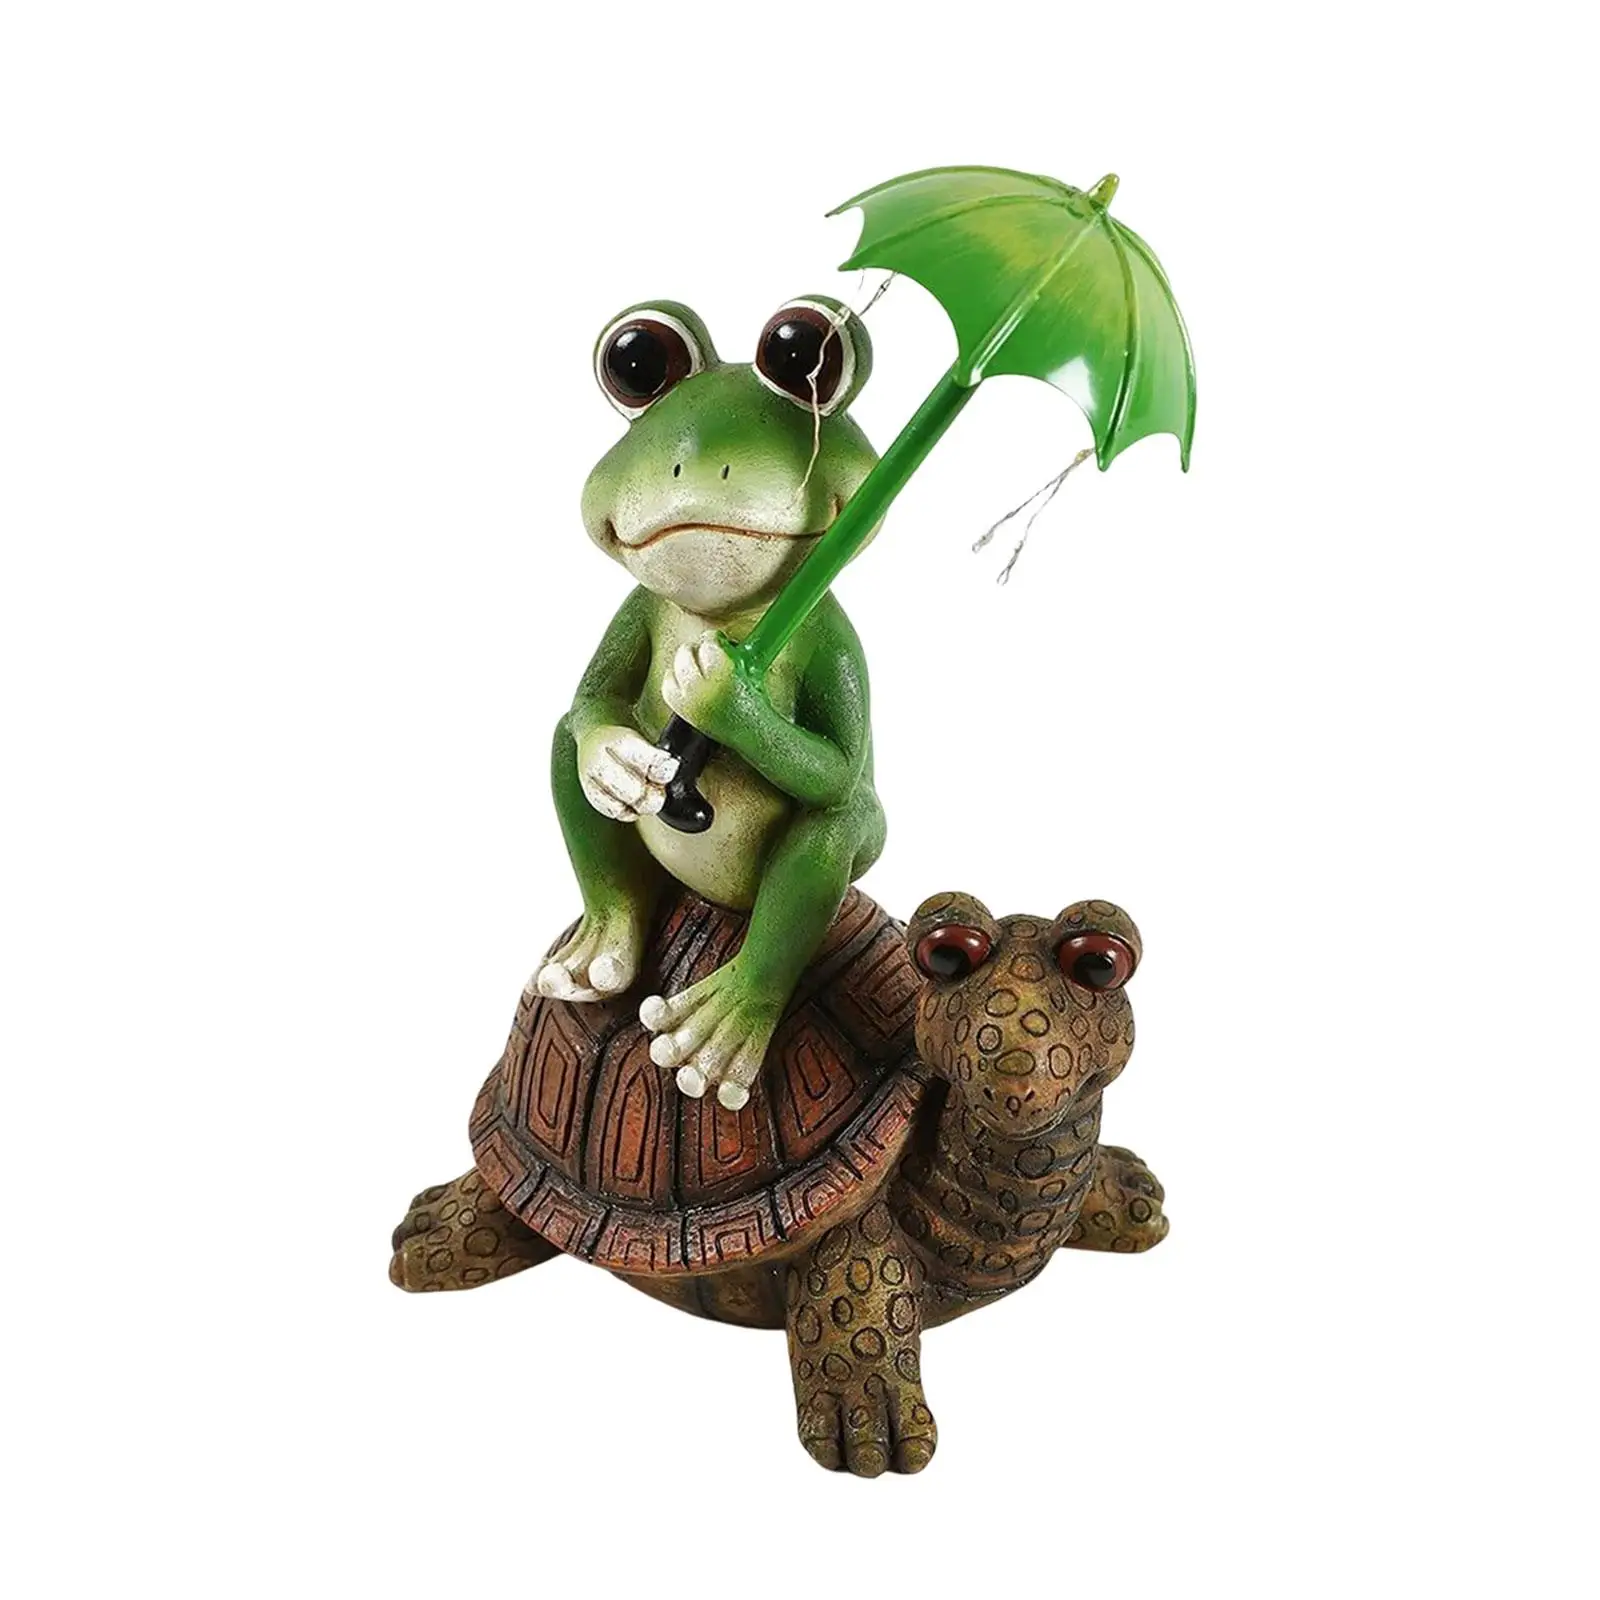 Outdoor Garden Frog and Turtle Statues Solar Lights Ornaments lovely Design Birthdays Gift Hand Painted Waterproof